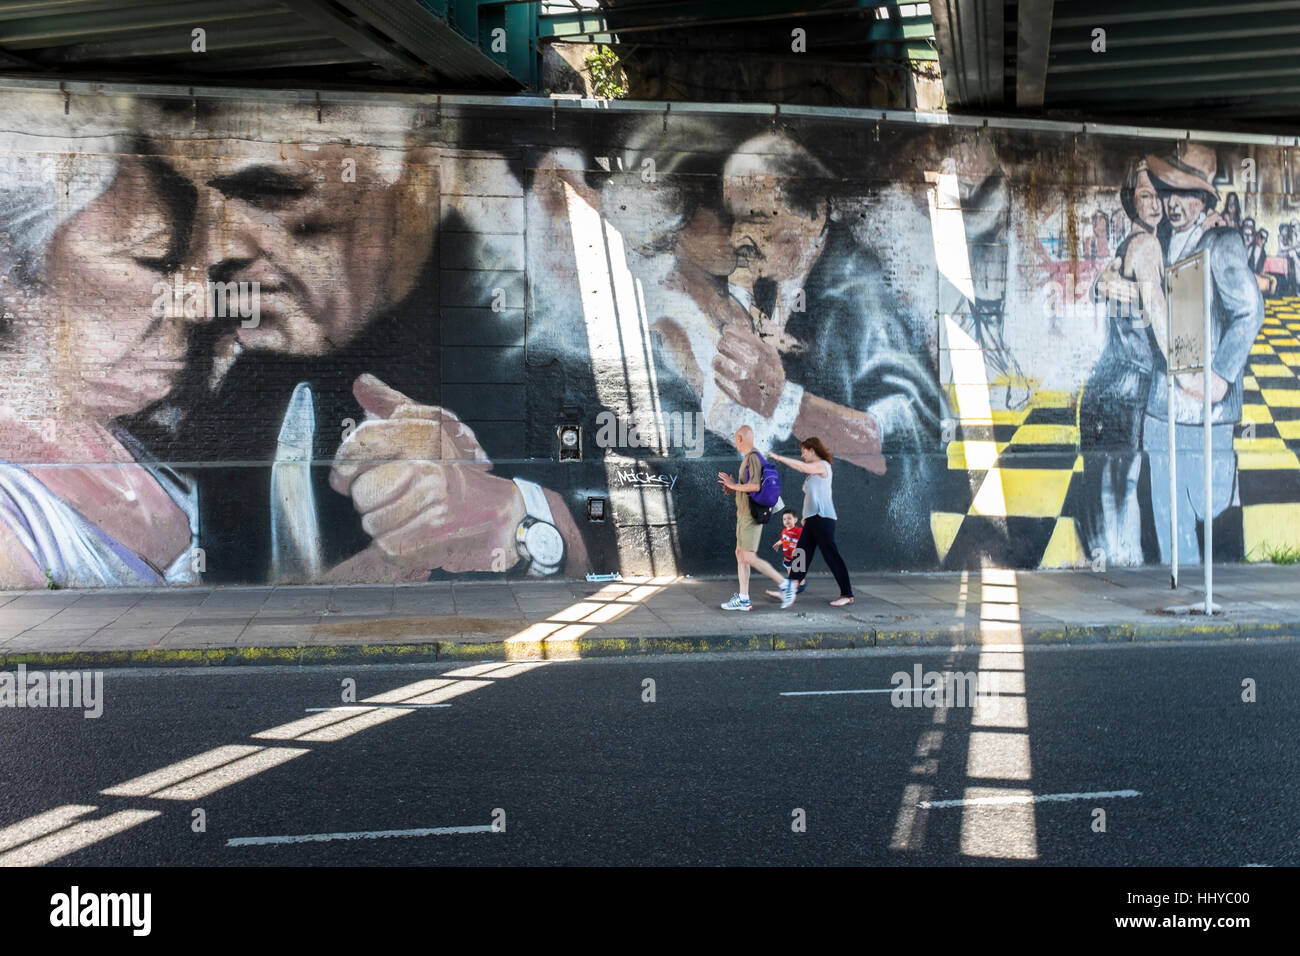 Pedestrians walk under a railway bridge where painted walls depict three couples dancing Tango in Buenos Aires. Stock Photo